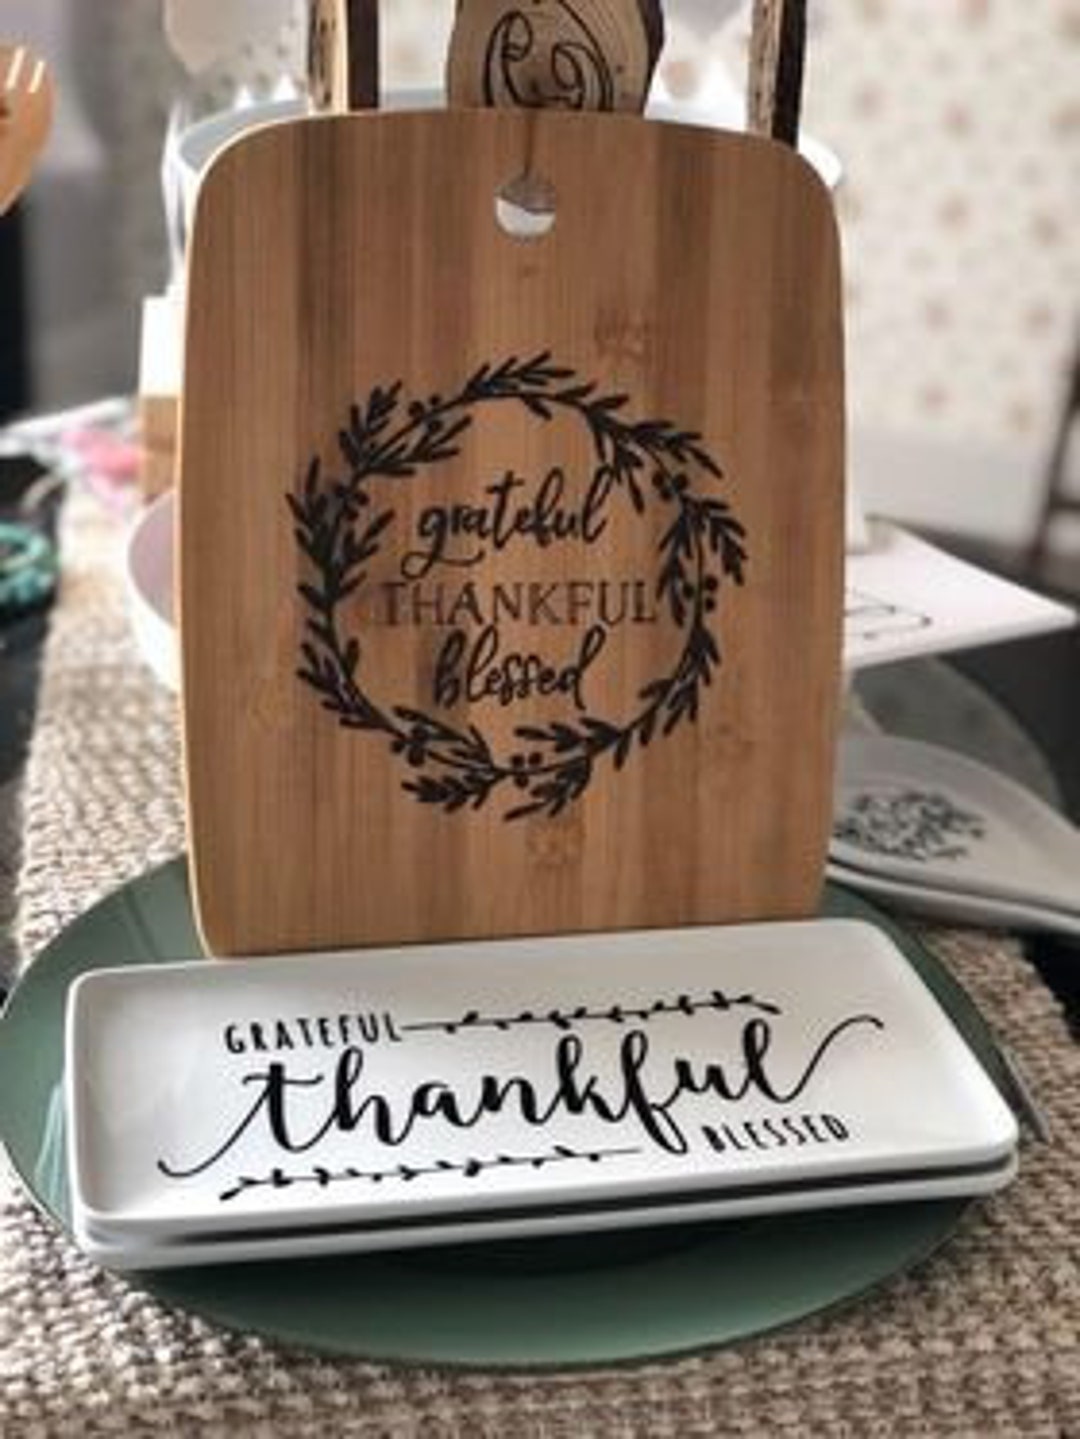 Thankful Grateful Blessed Personalized Maple Oversized Cutting Board- 18x24